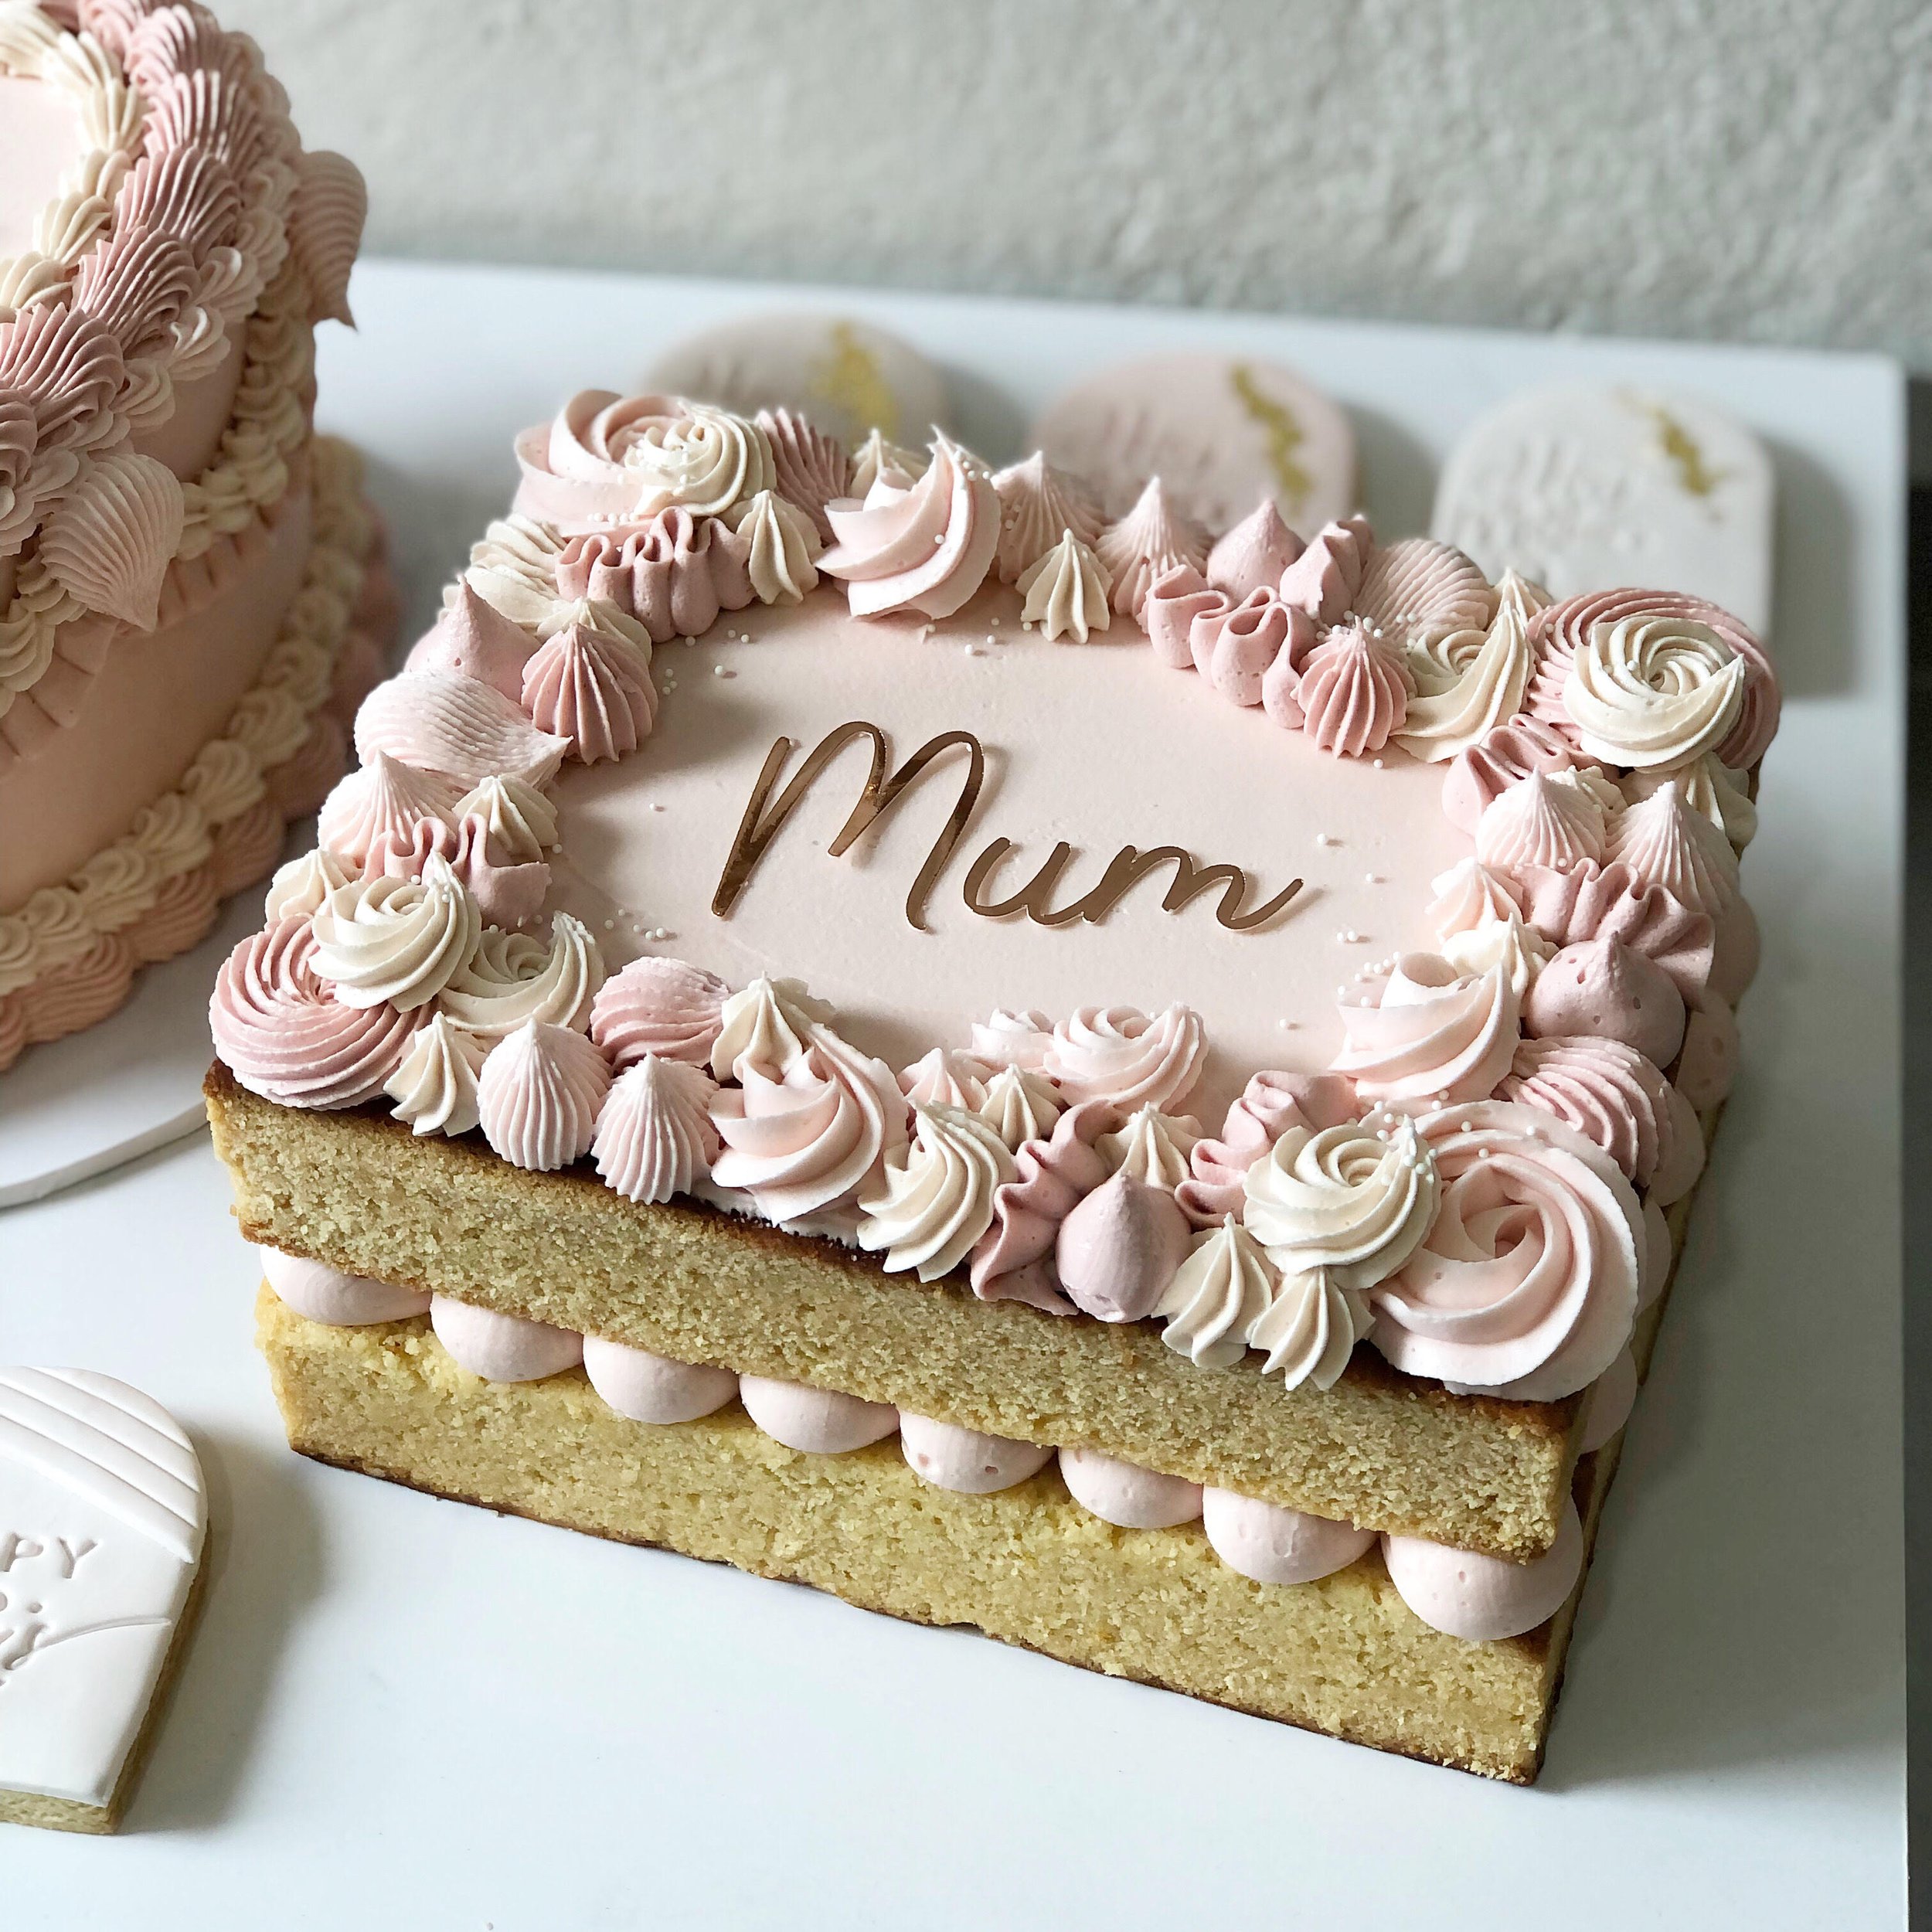 12 Gorgeous Cake Decorating Ideas For Mother's Day - Find Your Cake  Inspiration